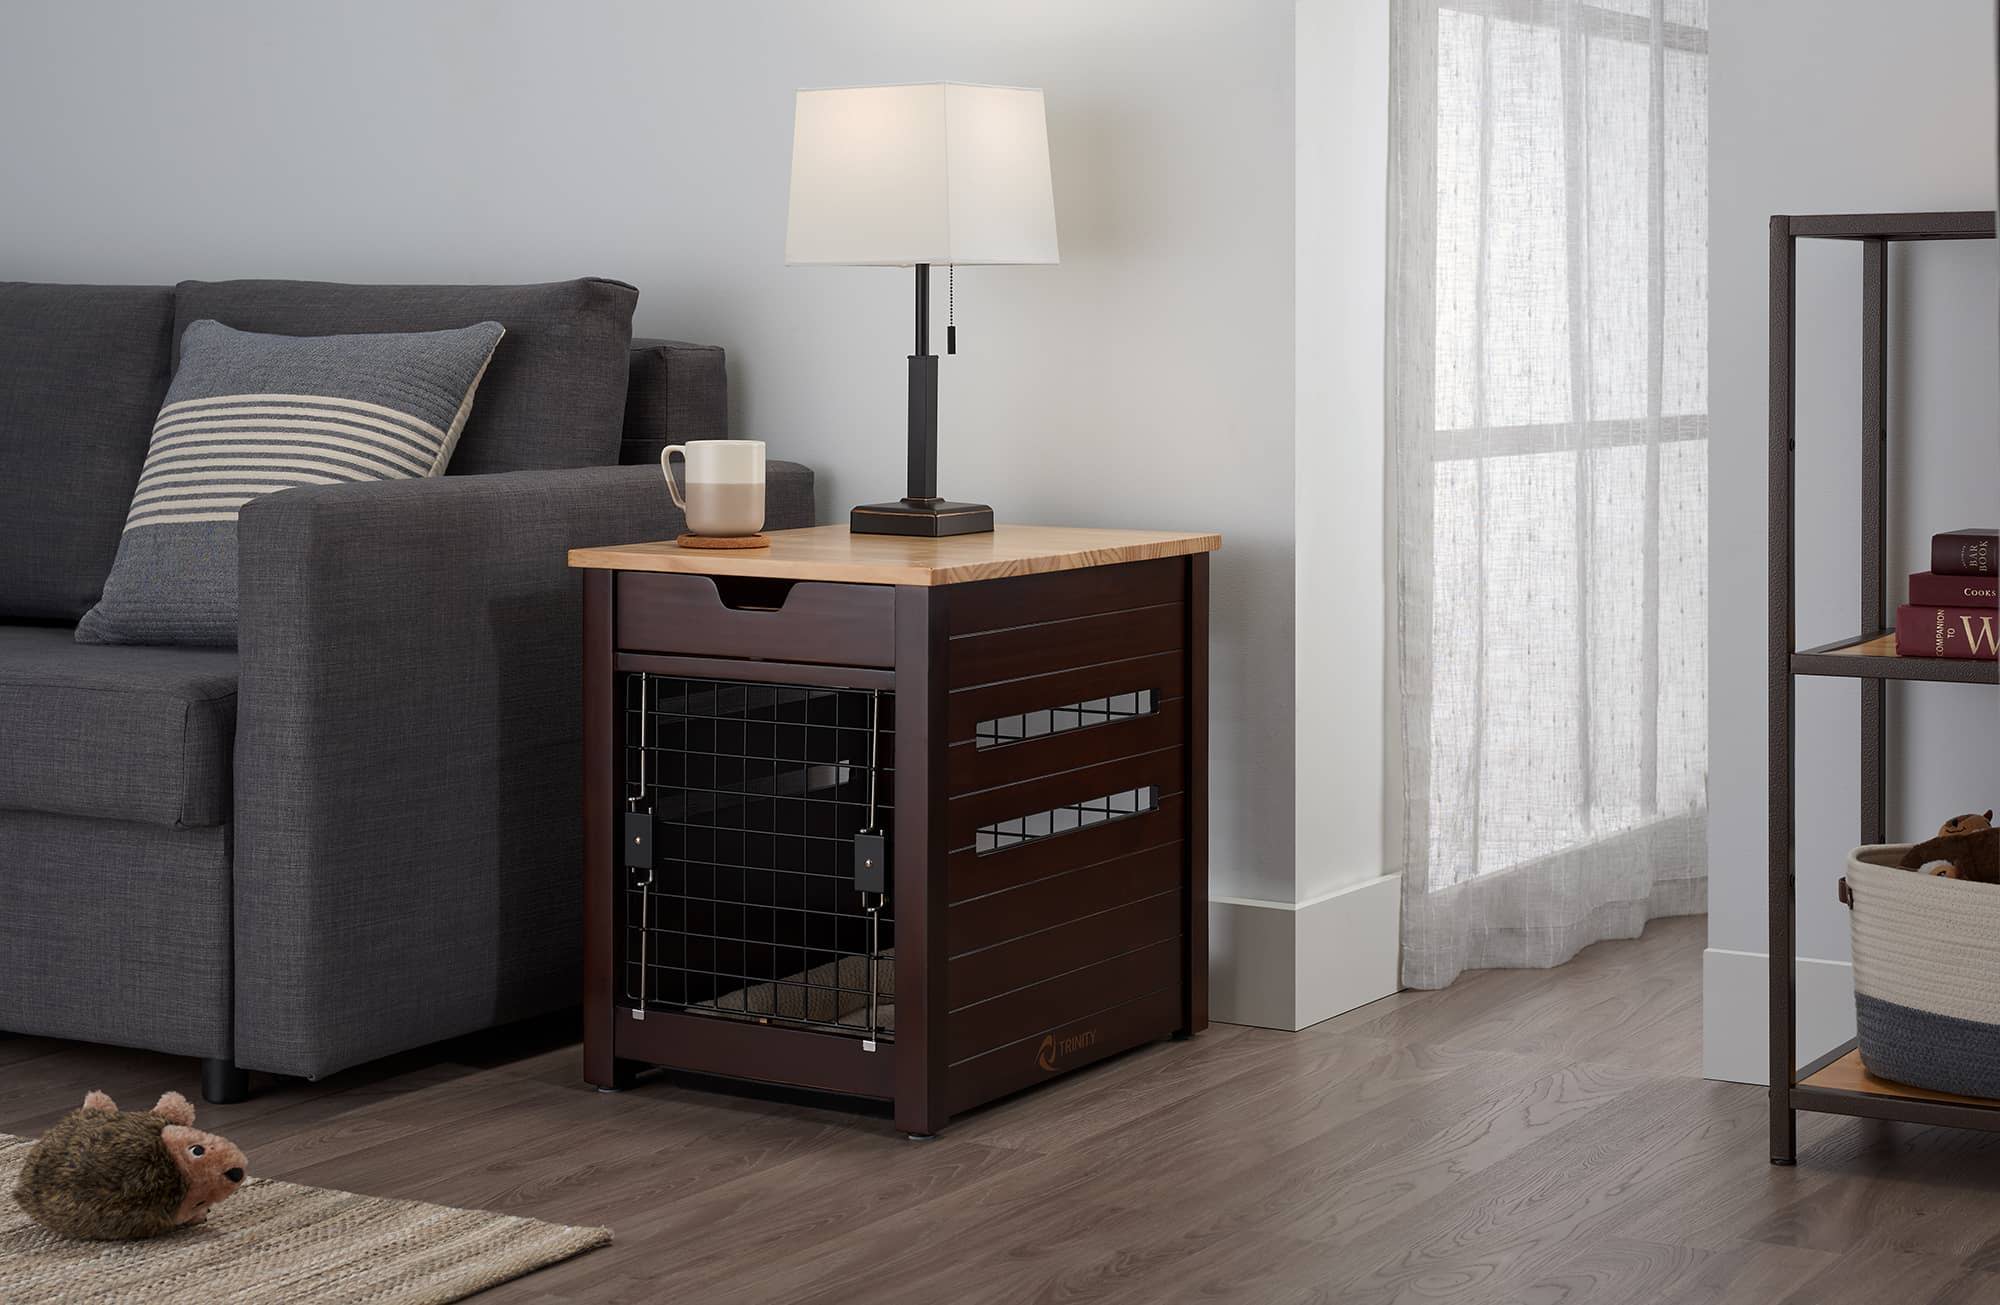 pet crate end table design in a living room